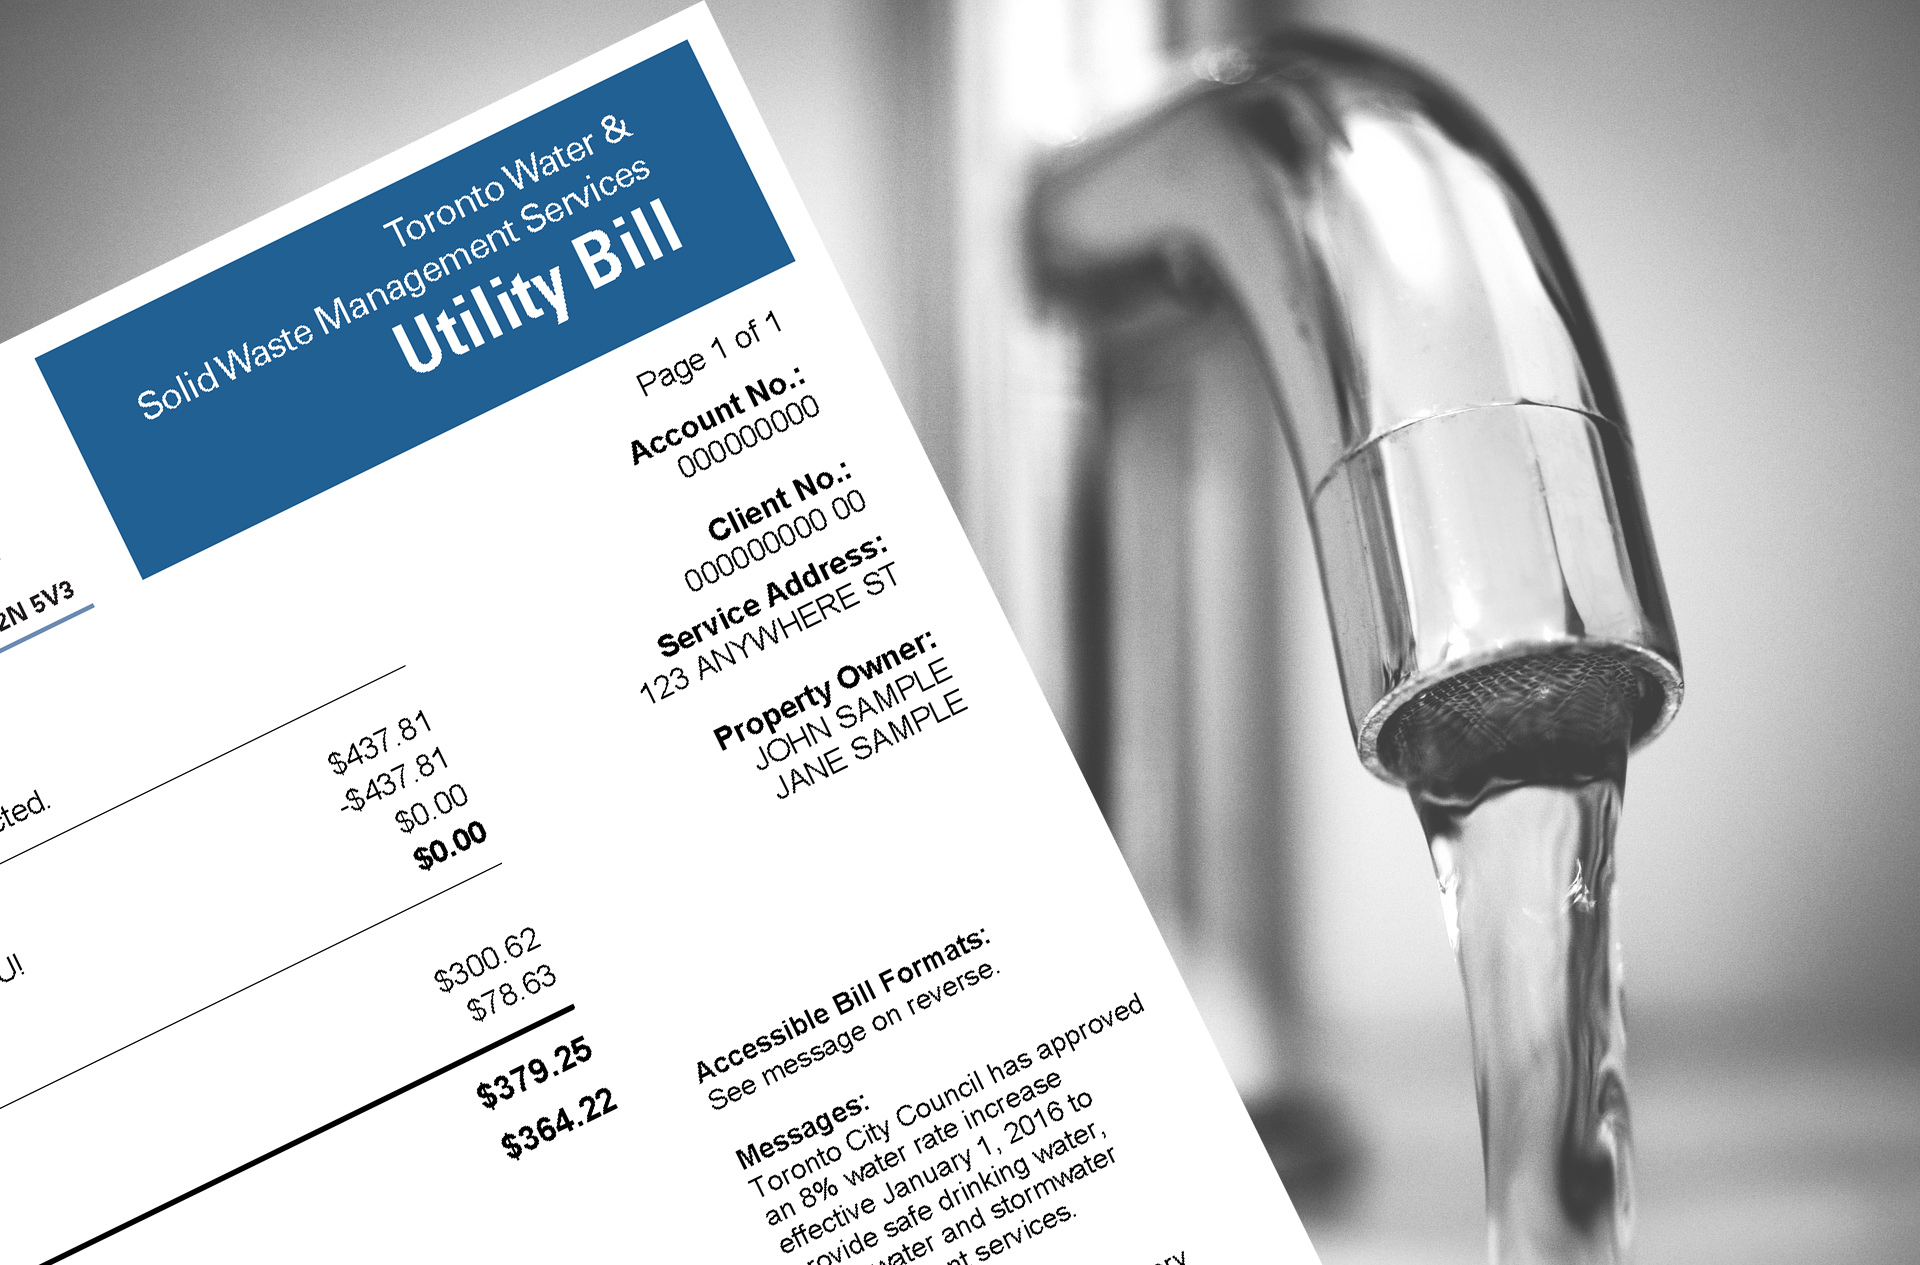 water-rate-increase-could-push-toronto-bill-to-almost-1-000-in-2018